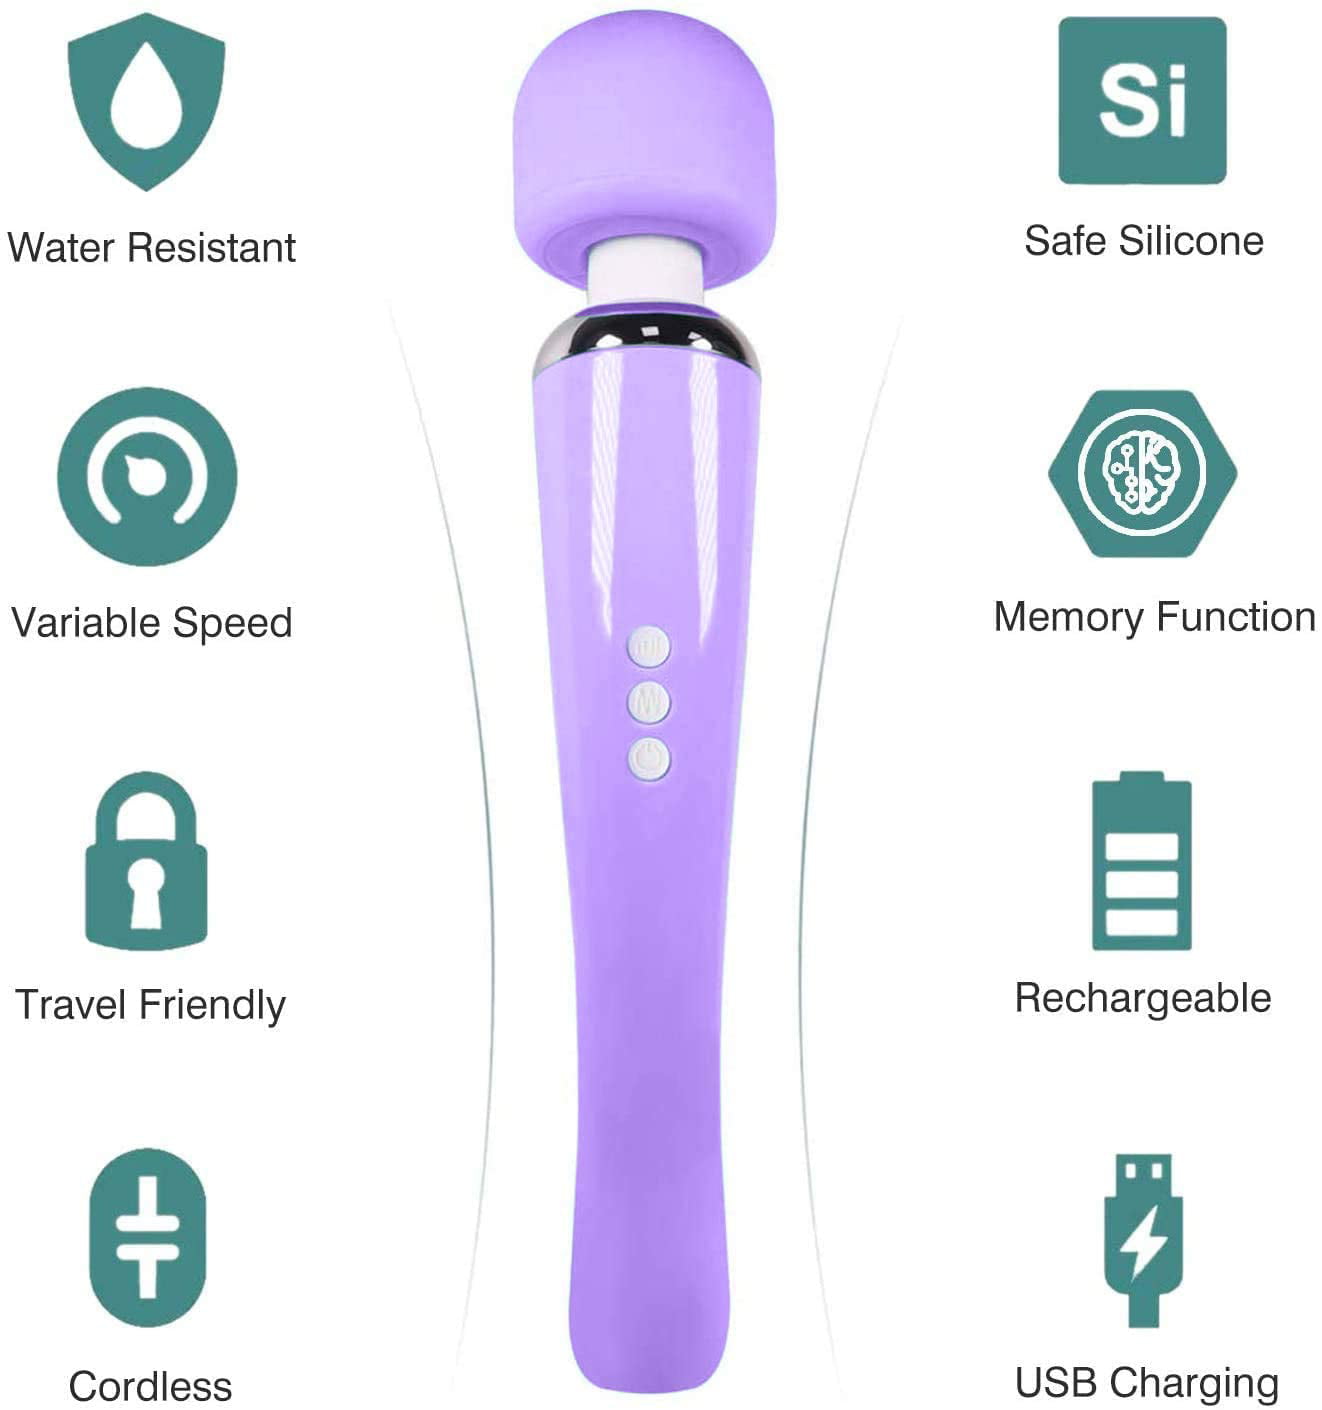 Therapeutic Back Massager - Handheld Cordless and Powerful Wand - 8 Speeds  20 Vibrating Patterns - U…See more Therapeutic Back Massager - Handheld